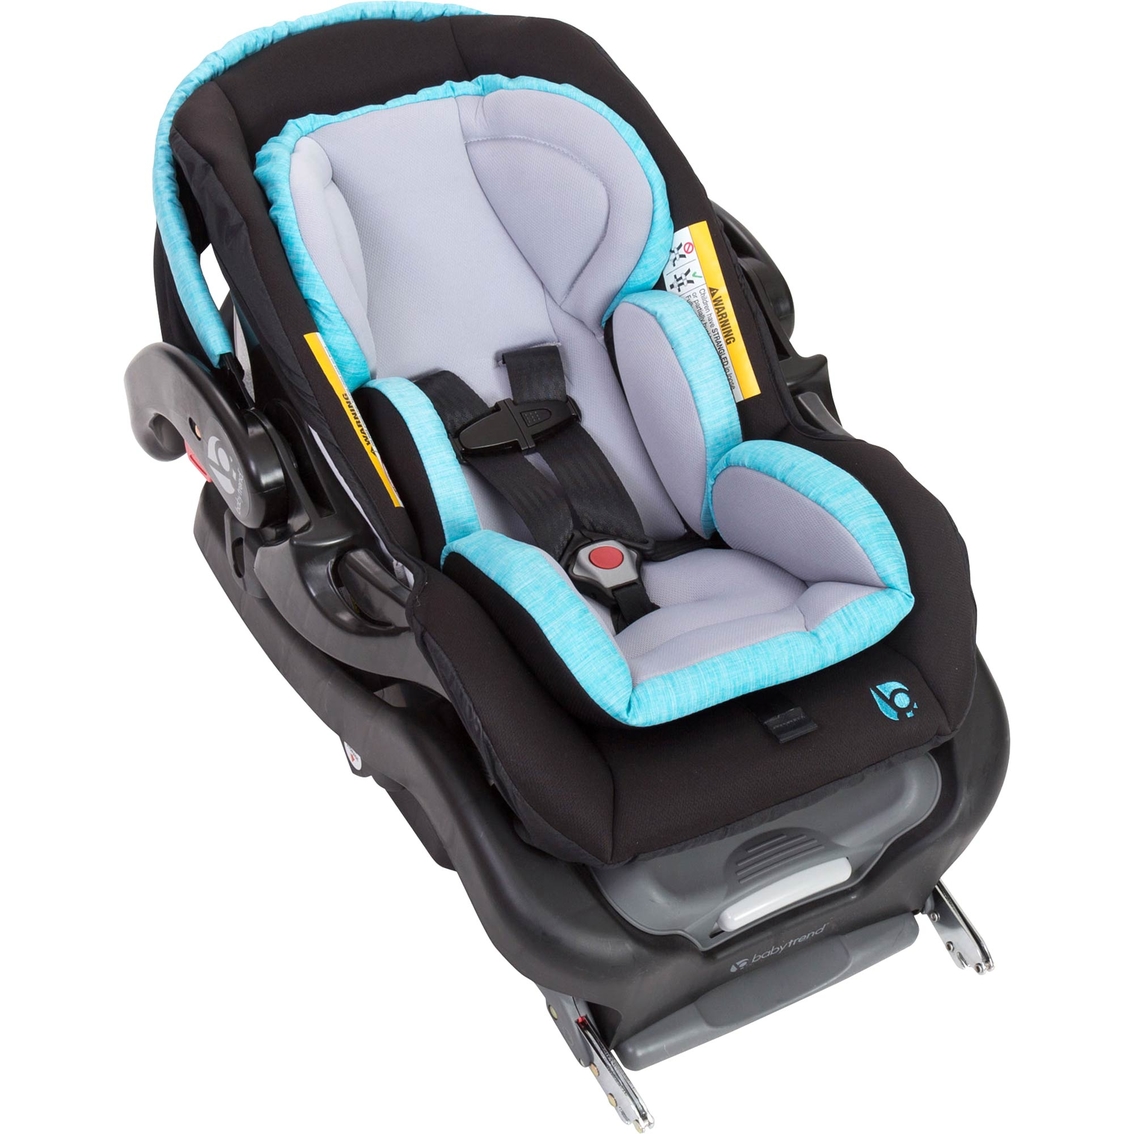 Baby Trend Secure Snap Gear 35 Infant Car Seat - Image 2 of 4